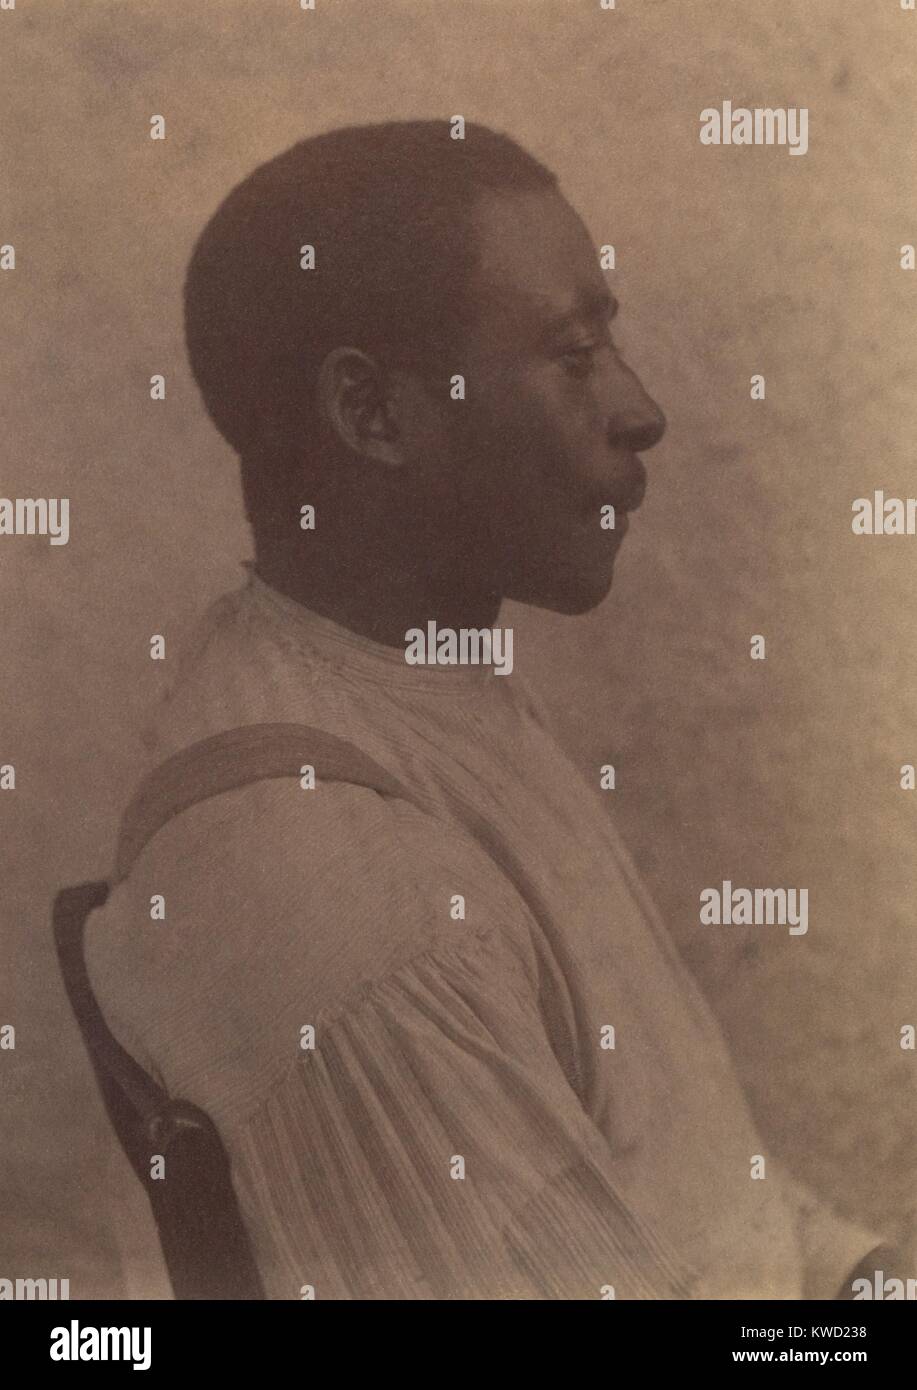 Profile portrait of an African American man by Philadelphia artist Thomas Eakins, 1884. Eakins created many photographs, most of which are figure studies and portraits  (BSLOC 2017 20 115) Stock Photo